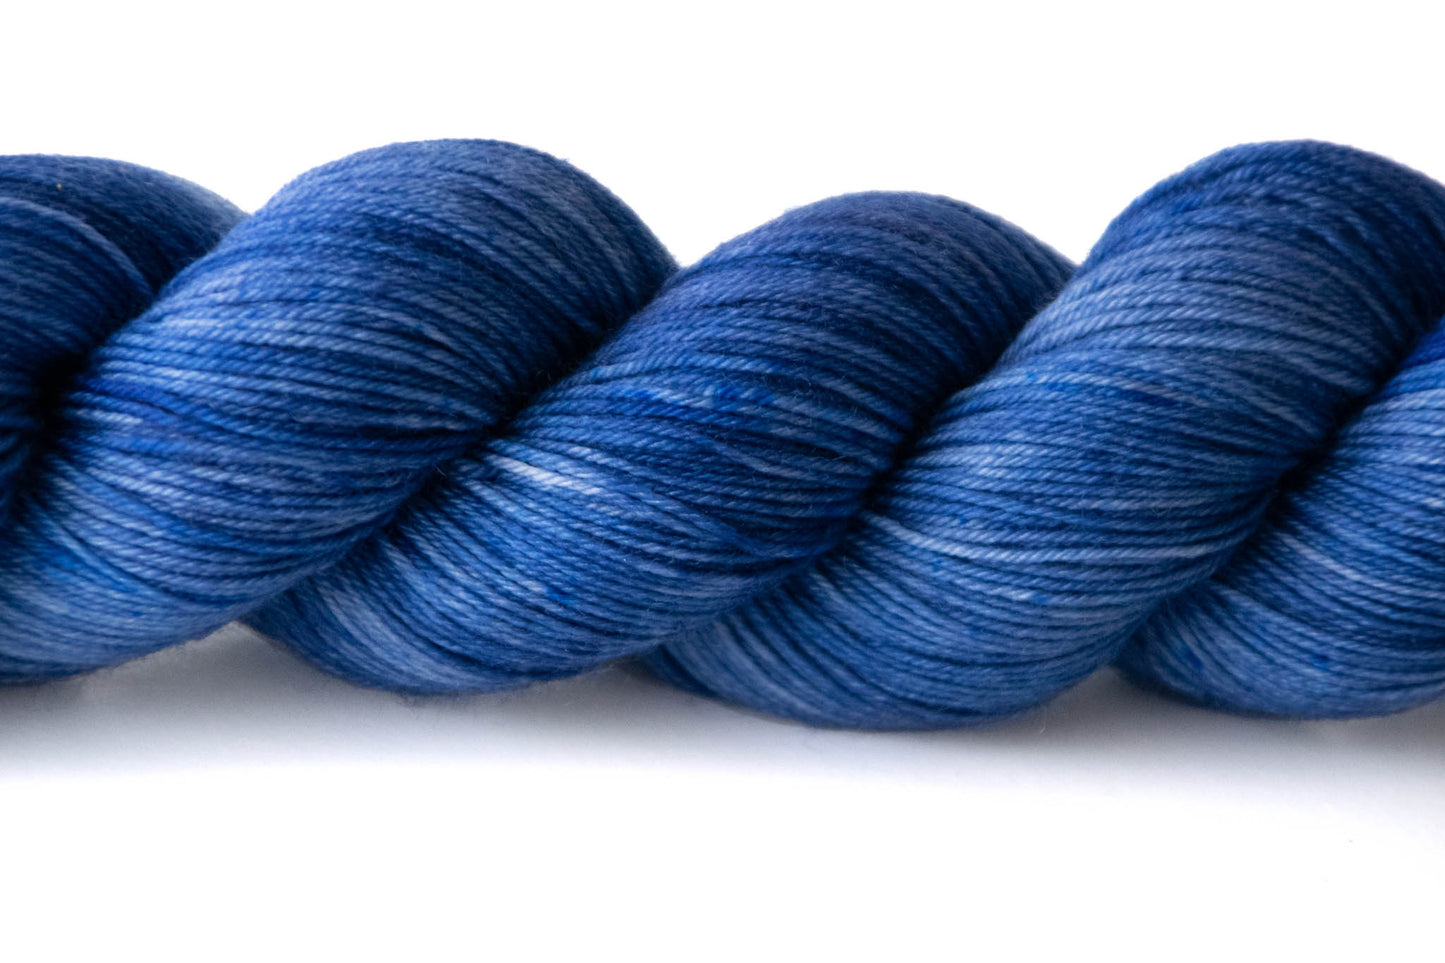 Closeup on the tonal qualities of Midnight Bloom, which ranges from lighter gray-undertone blue to dark navy, and is skewed more towards dark blue.